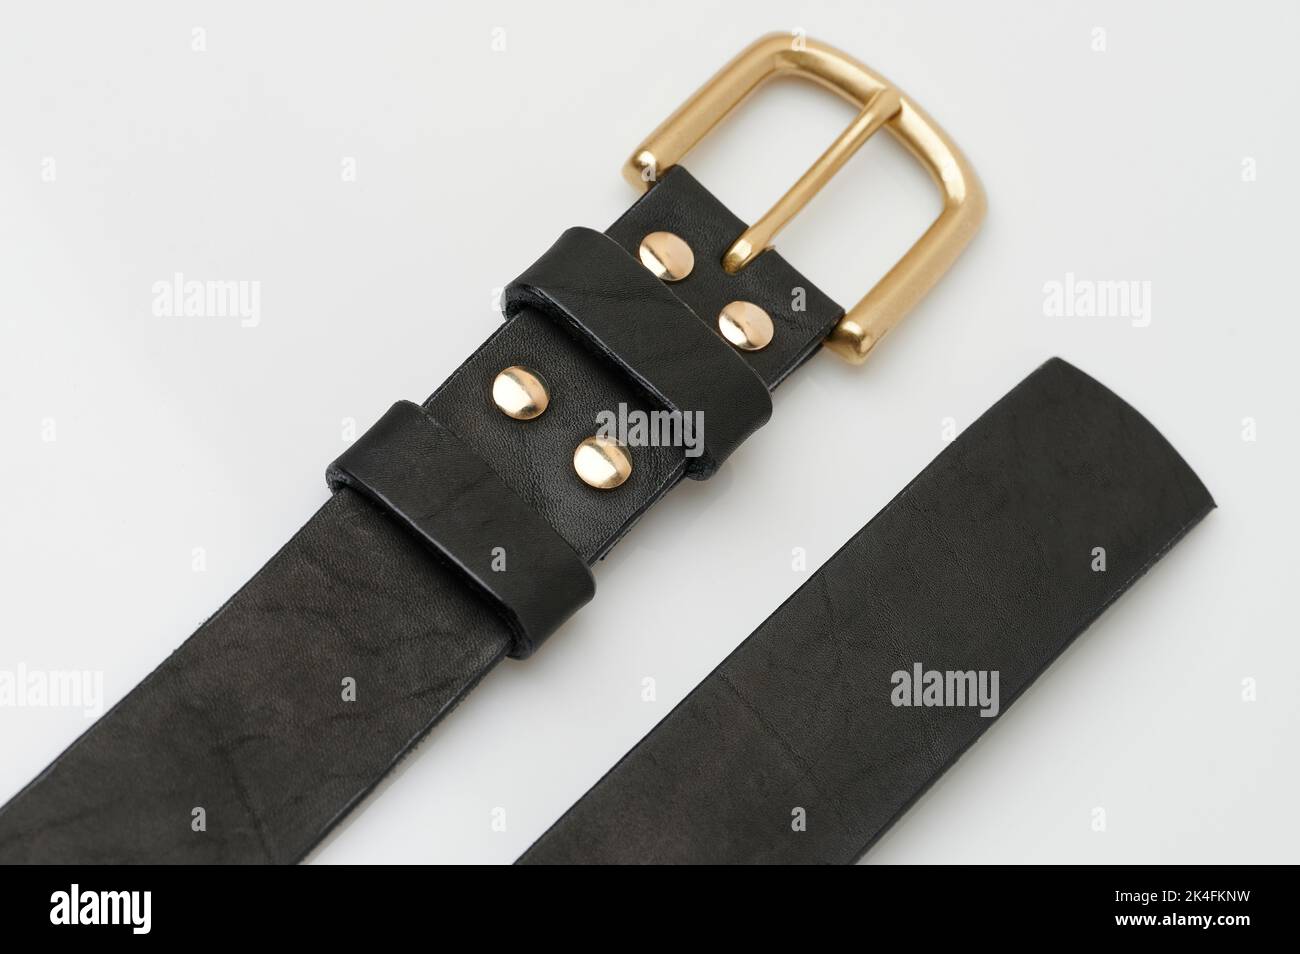 Clean leather men belt isolated on studio background close up view Stock Photo